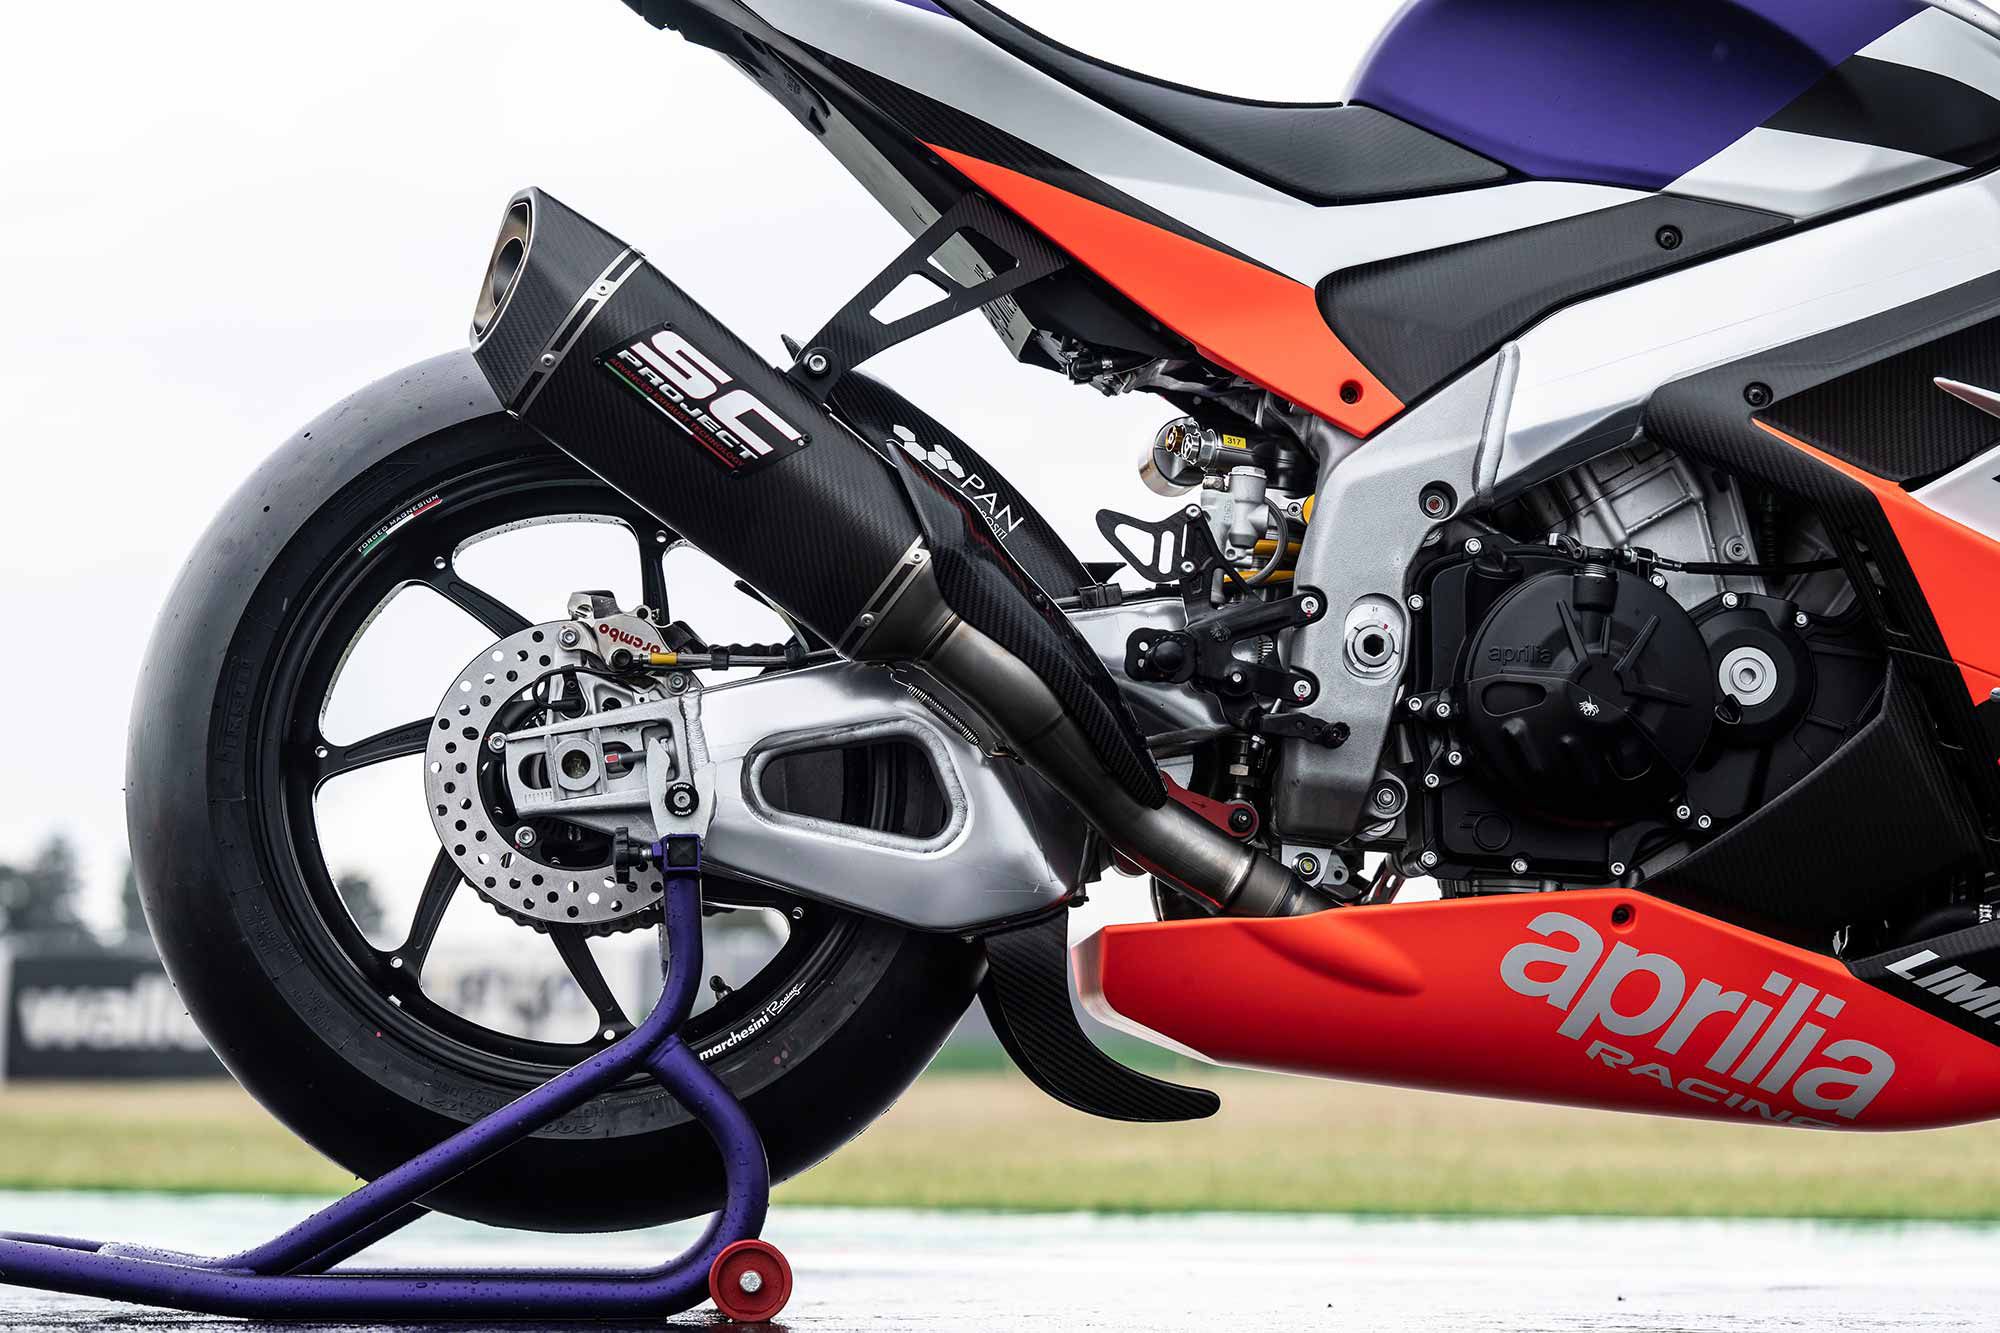 MotoGP-derived tech abounds on the XTrenta.